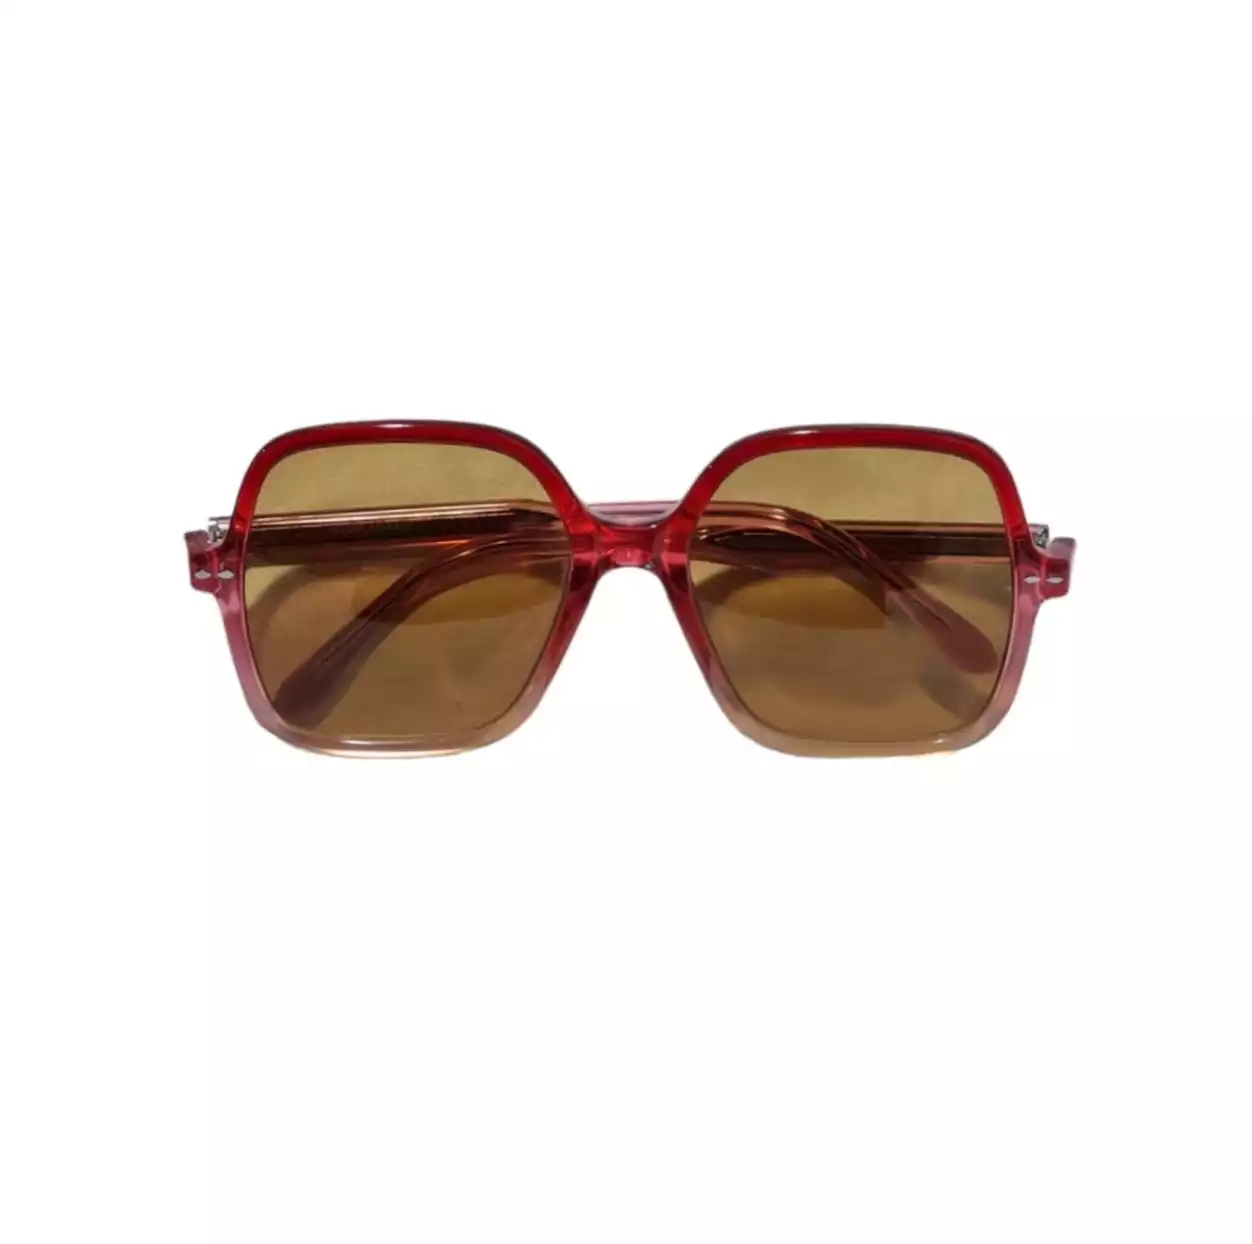 Sunglass by Isabel Marant